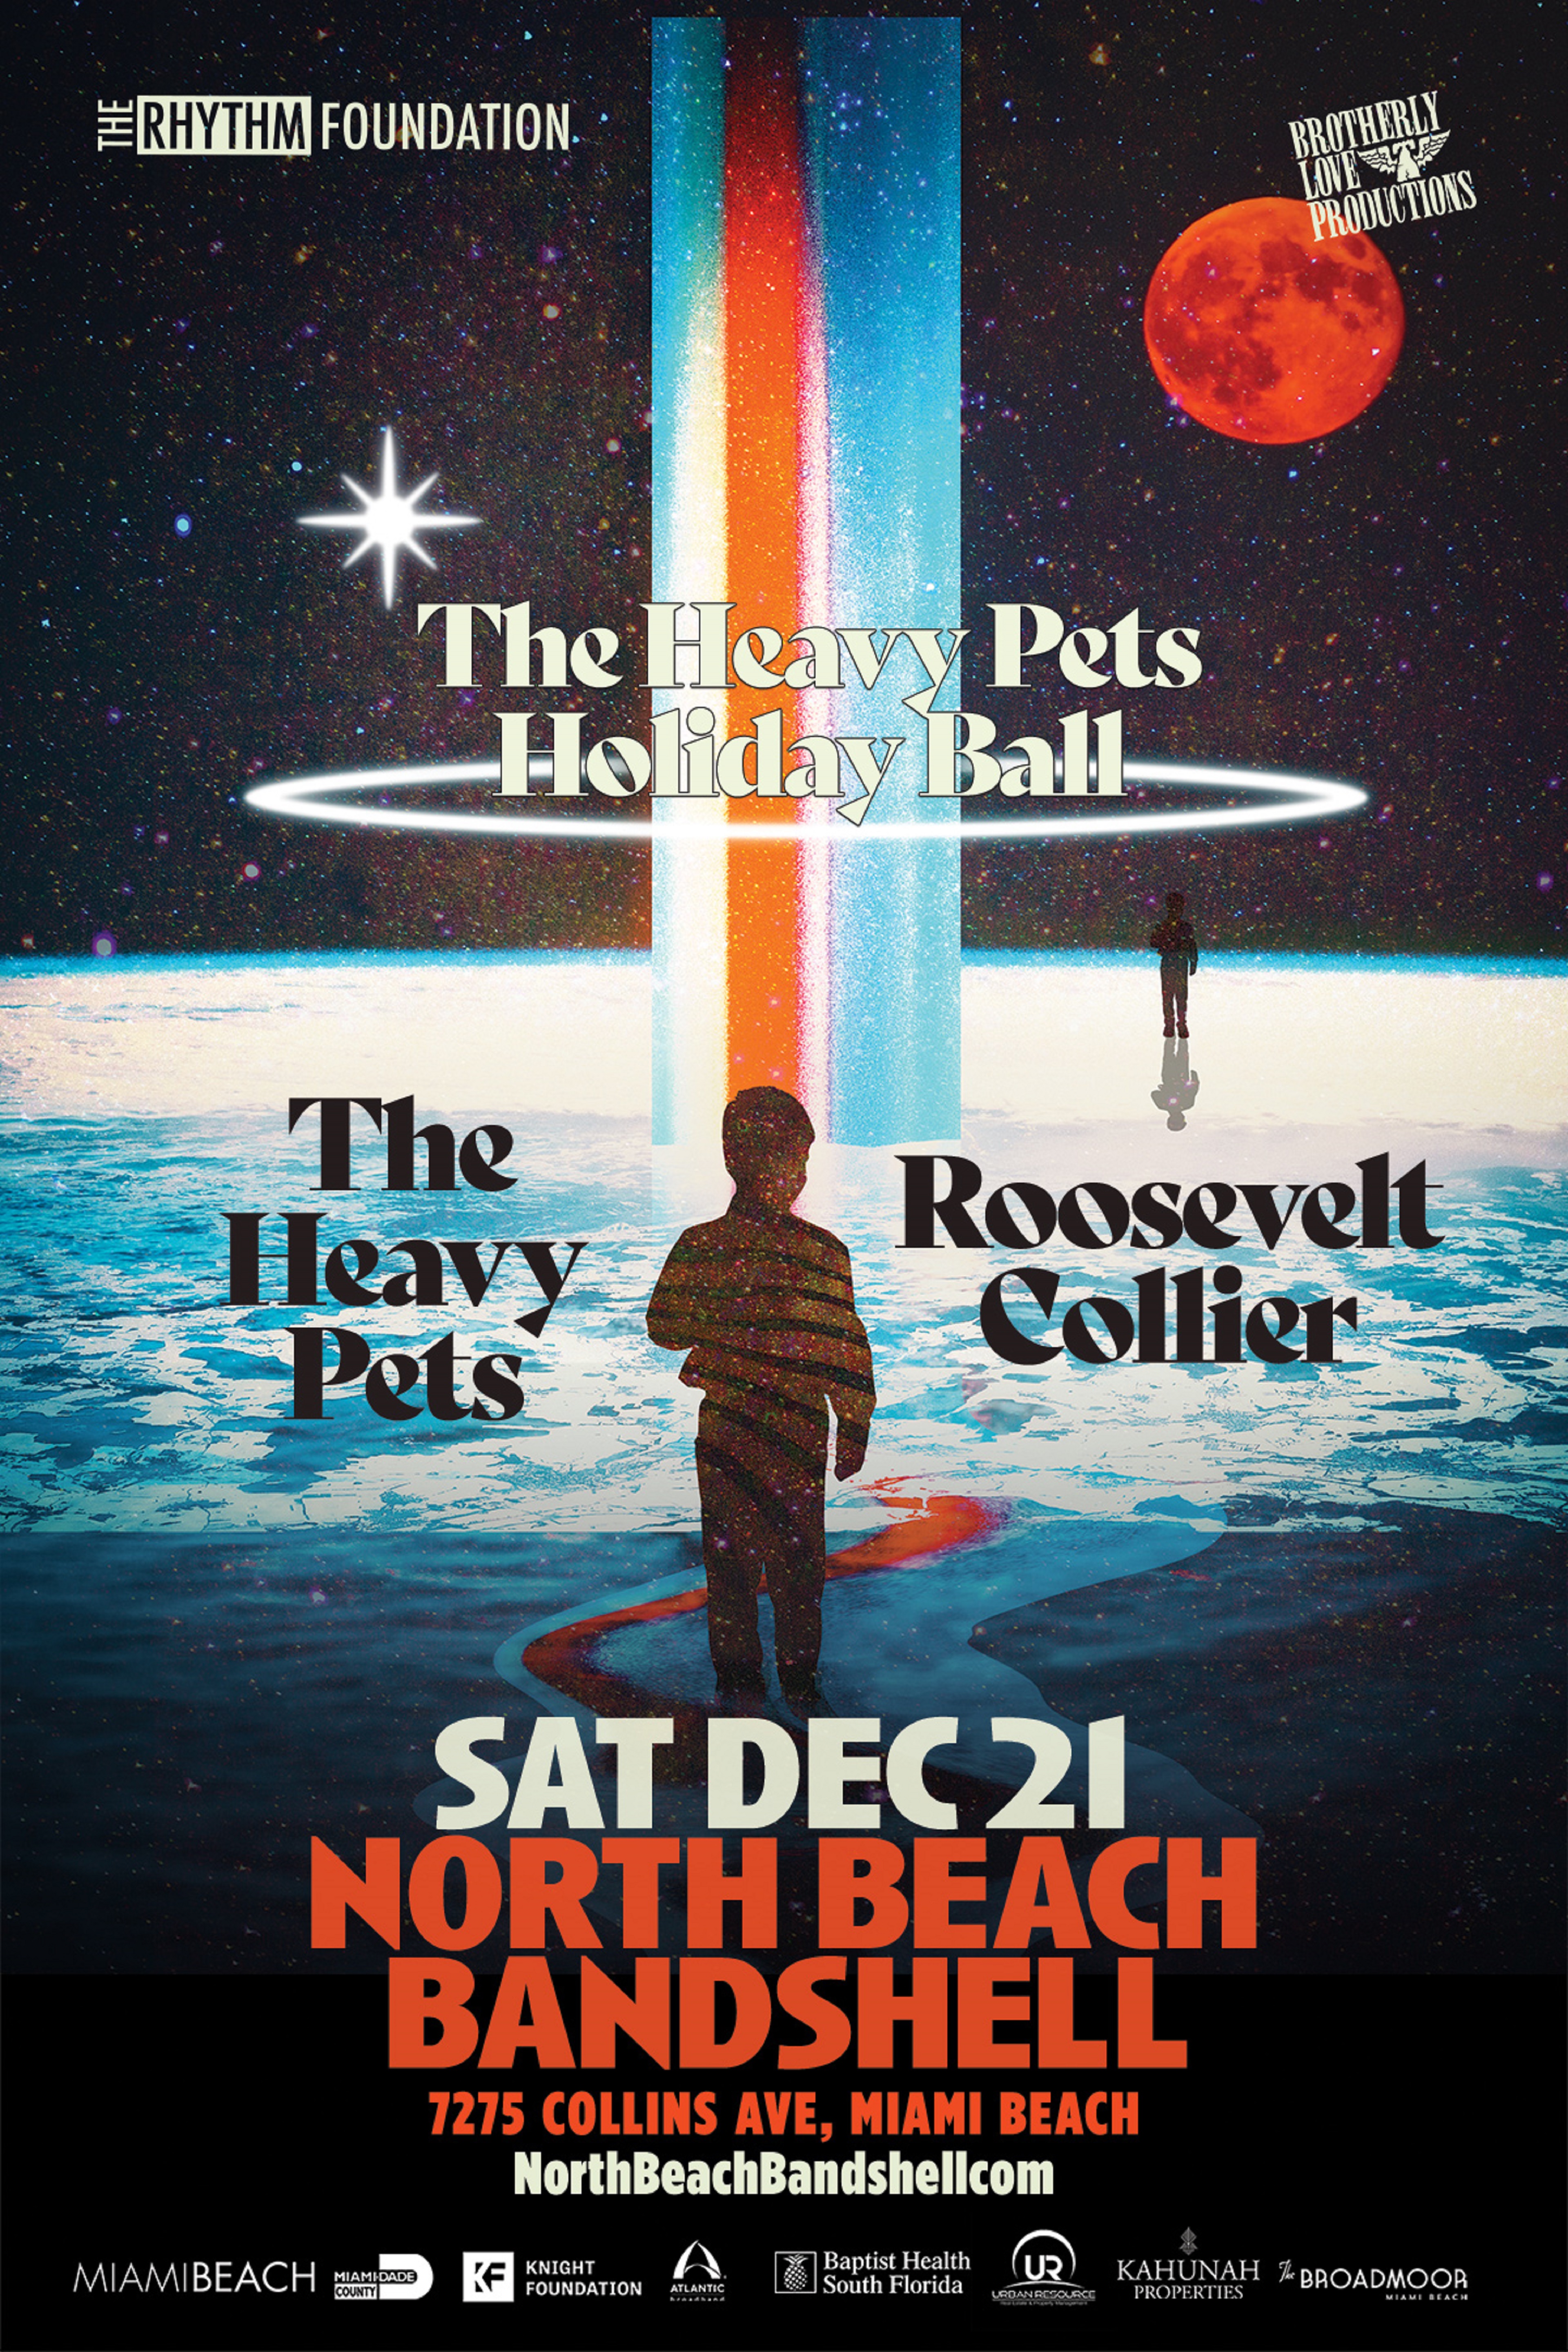 The Heavy Pets Holiday Ball  Benefiting Miami Beach Youth Music Festival and Lotus House Women’s Shelter